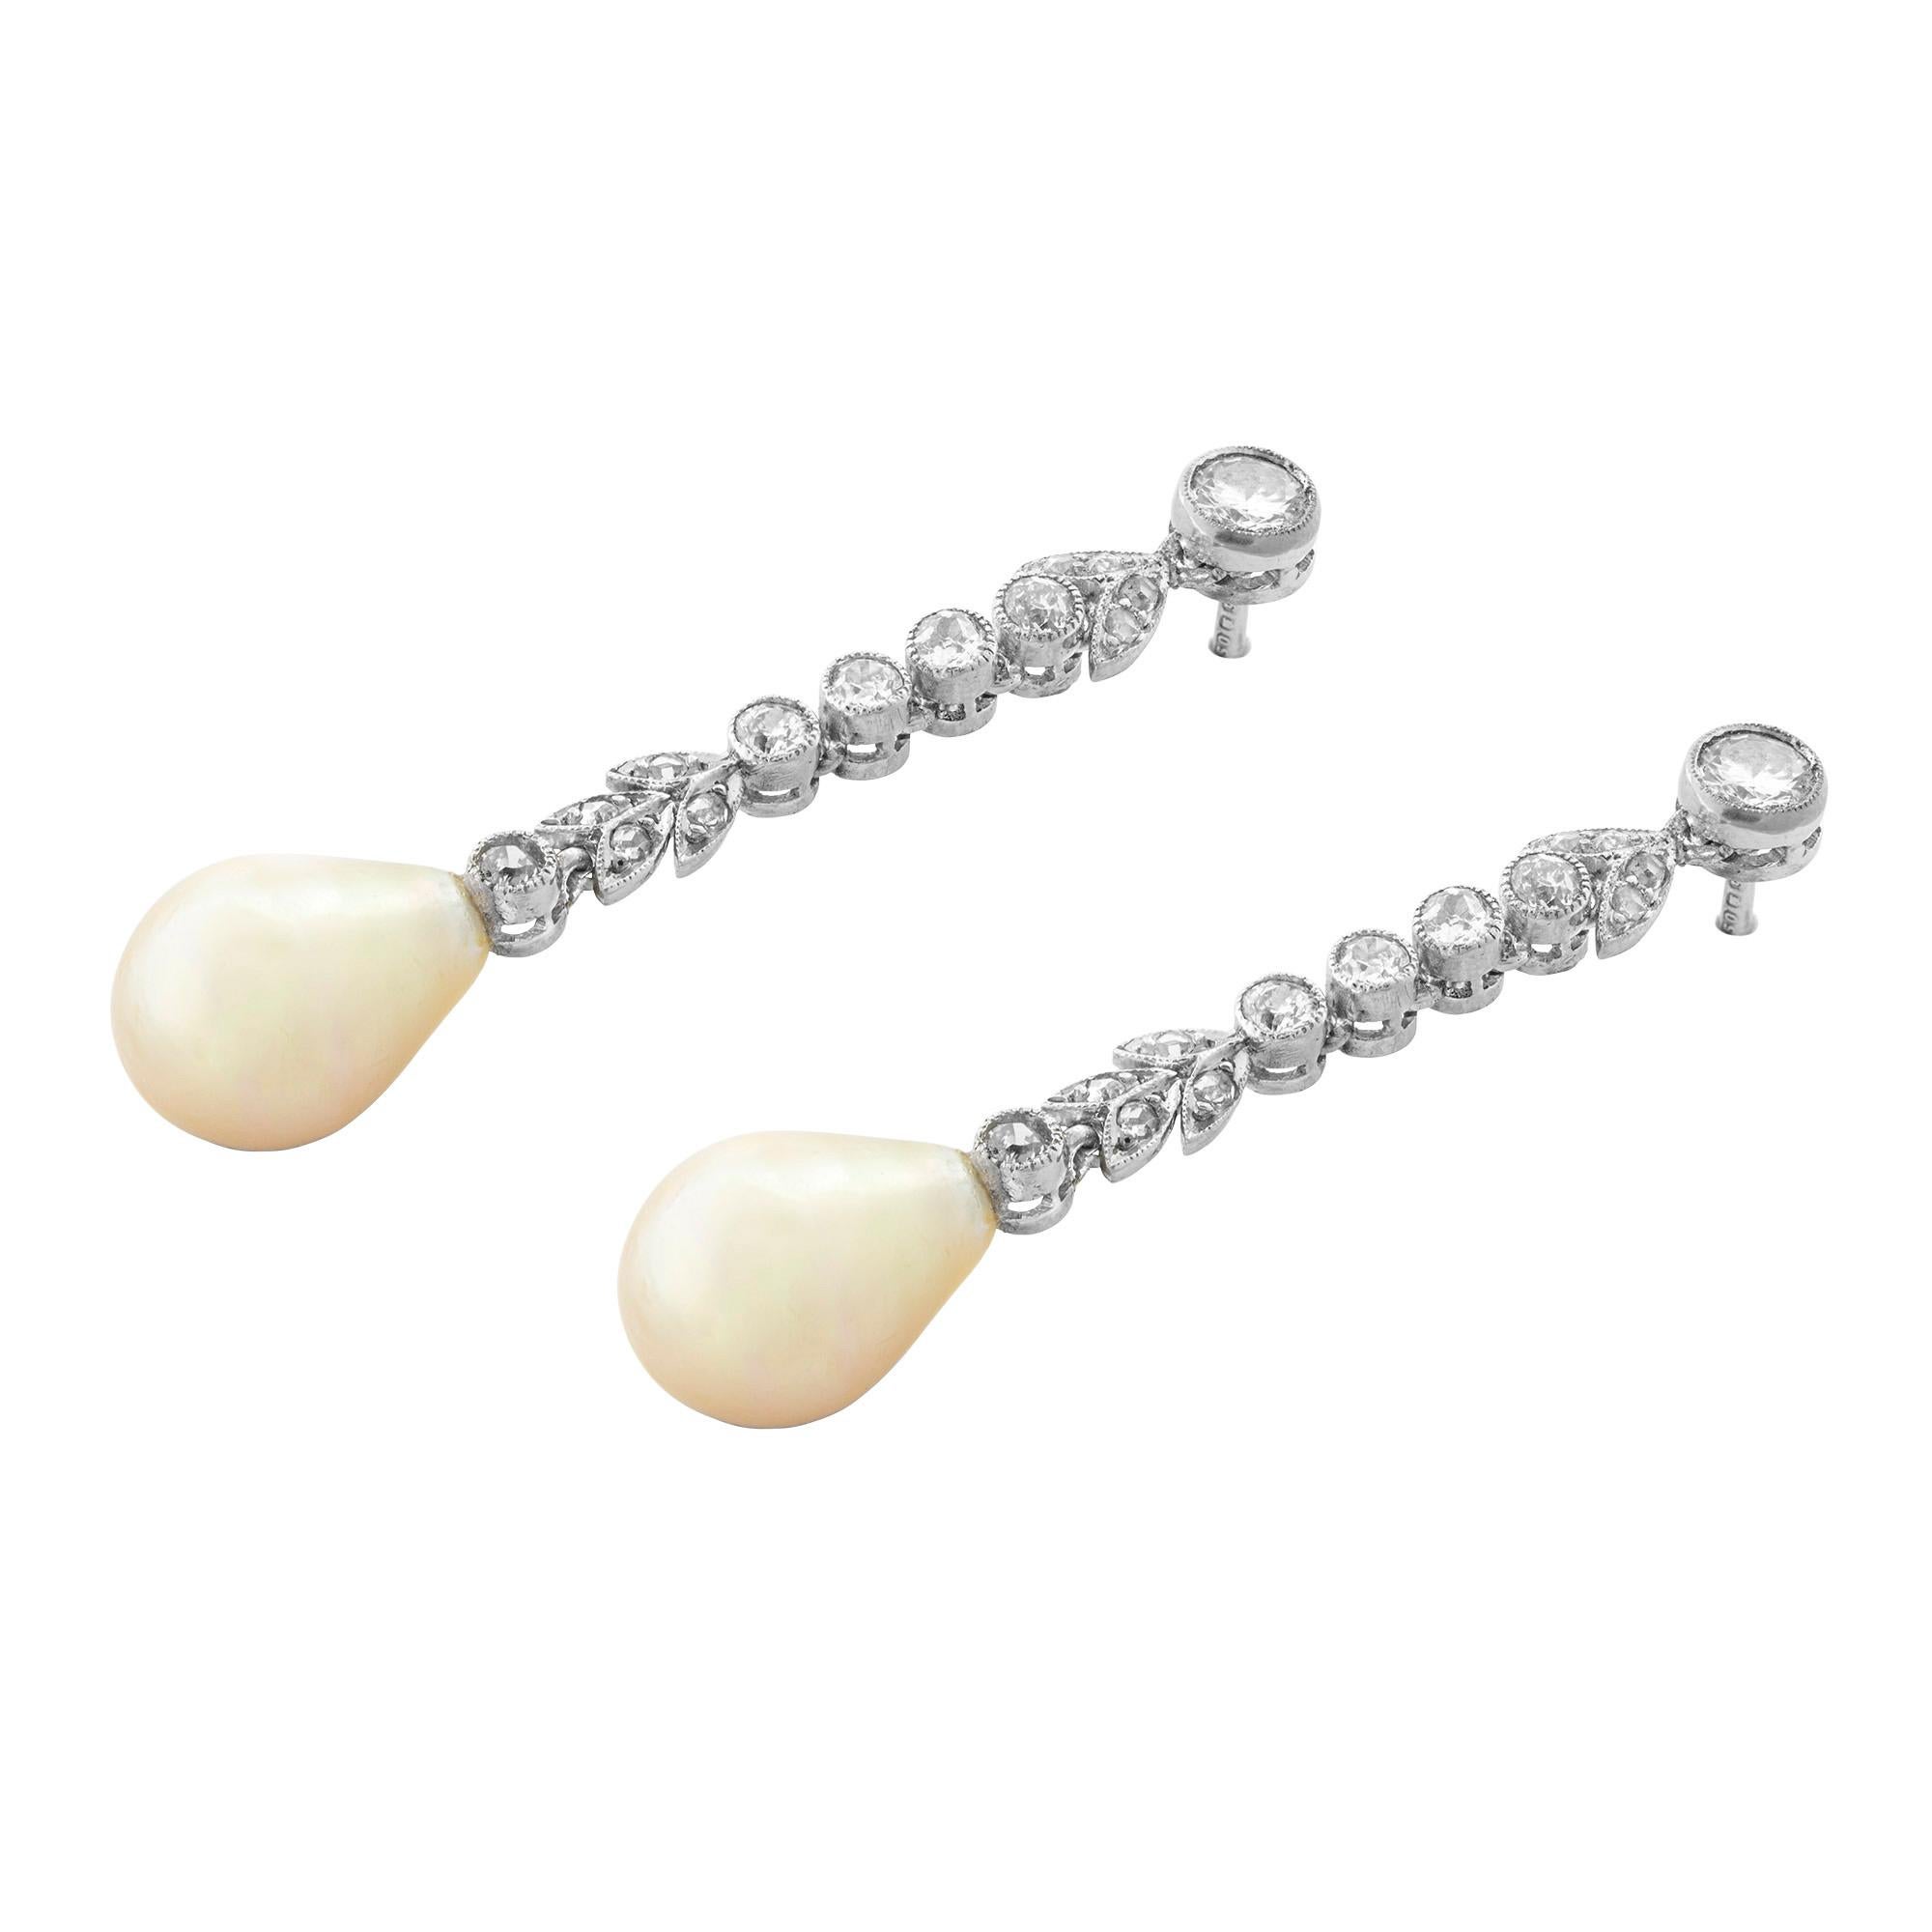 A pair of Edwardian pearl and diamond drop earrings, the natural saltwater drop shape pearls measuring approximately 11 x 8.3mm and weighing 4.28 and 4.73 carats, accompanied by a Gem & Pearl Laboratory certificate, suspended from an old- and